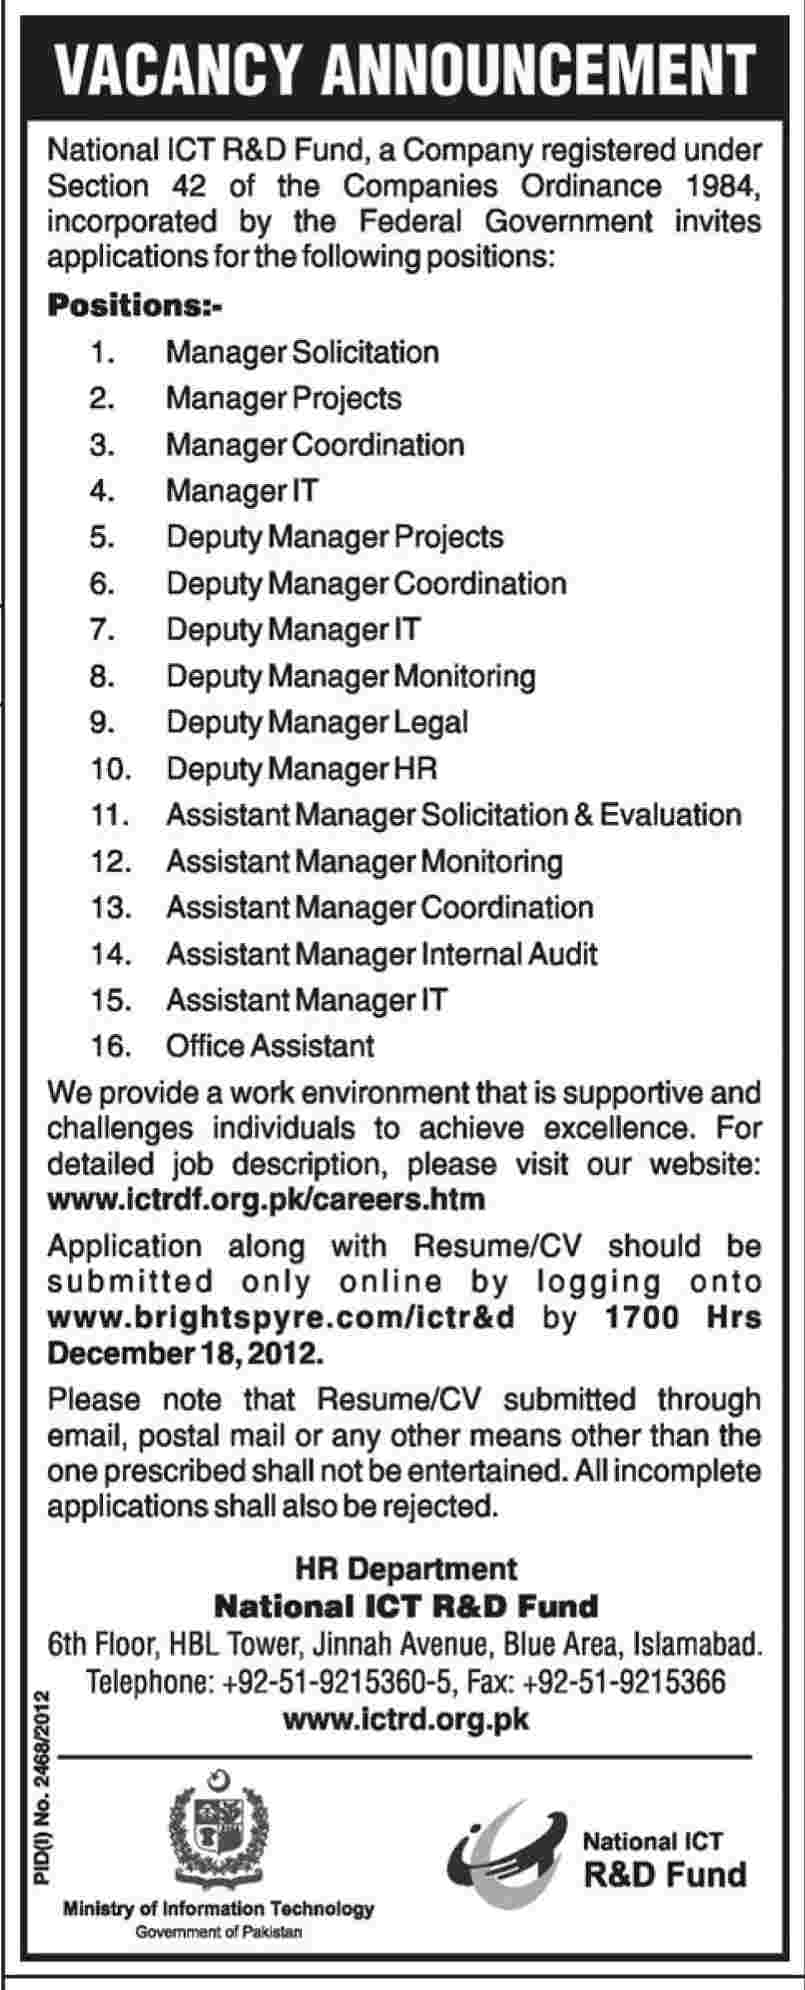 National ICT R & D Fund Jobs Islamabad (www.ictrdf.org.pk/careers.htm)